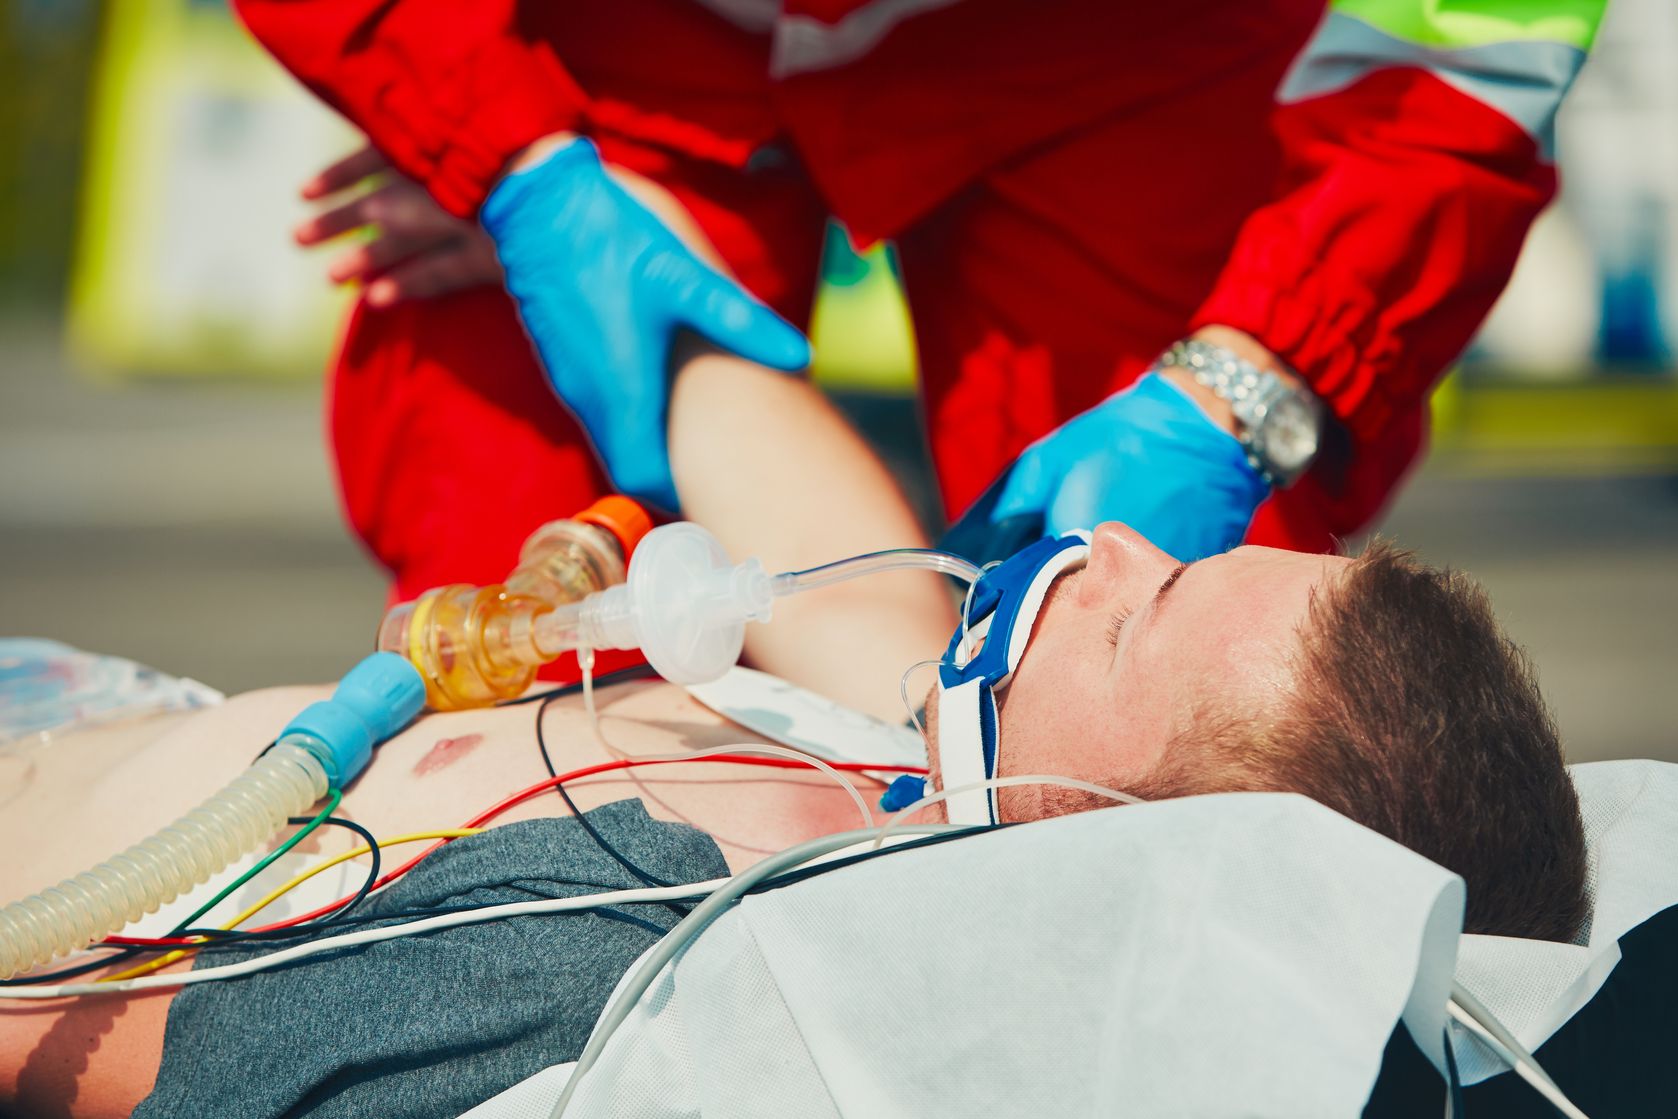 Emergency Live | Airway Management Guidelines could change quickly